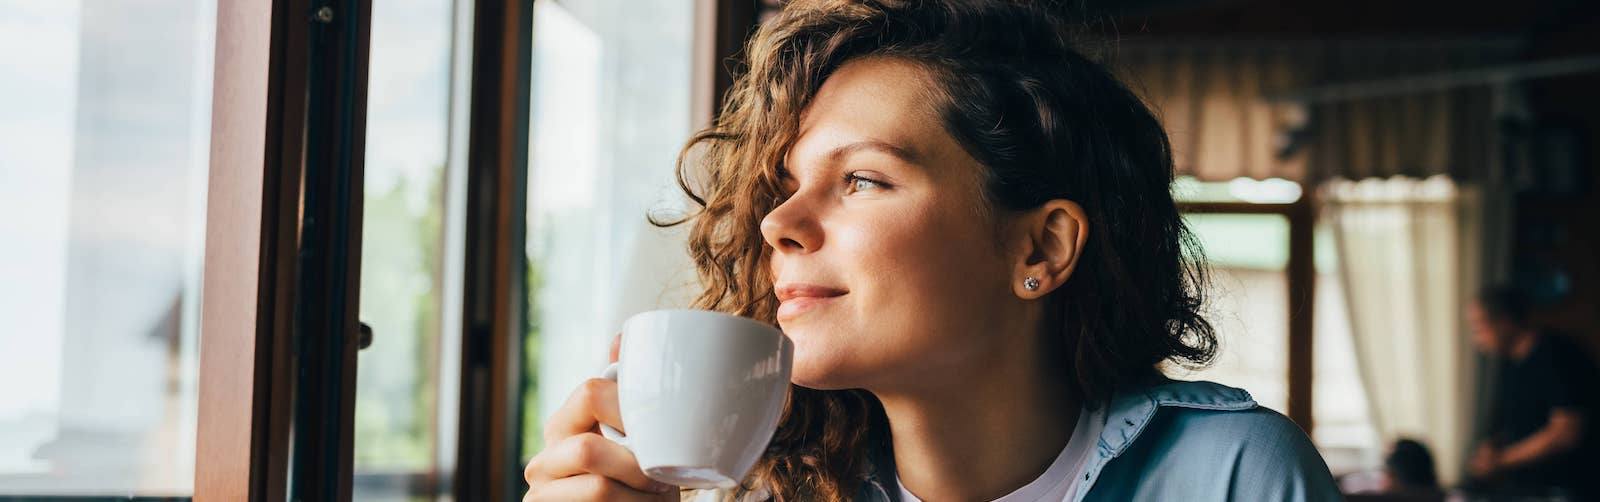 A women possibly enjoying a cup of coffee while looking outside the window.